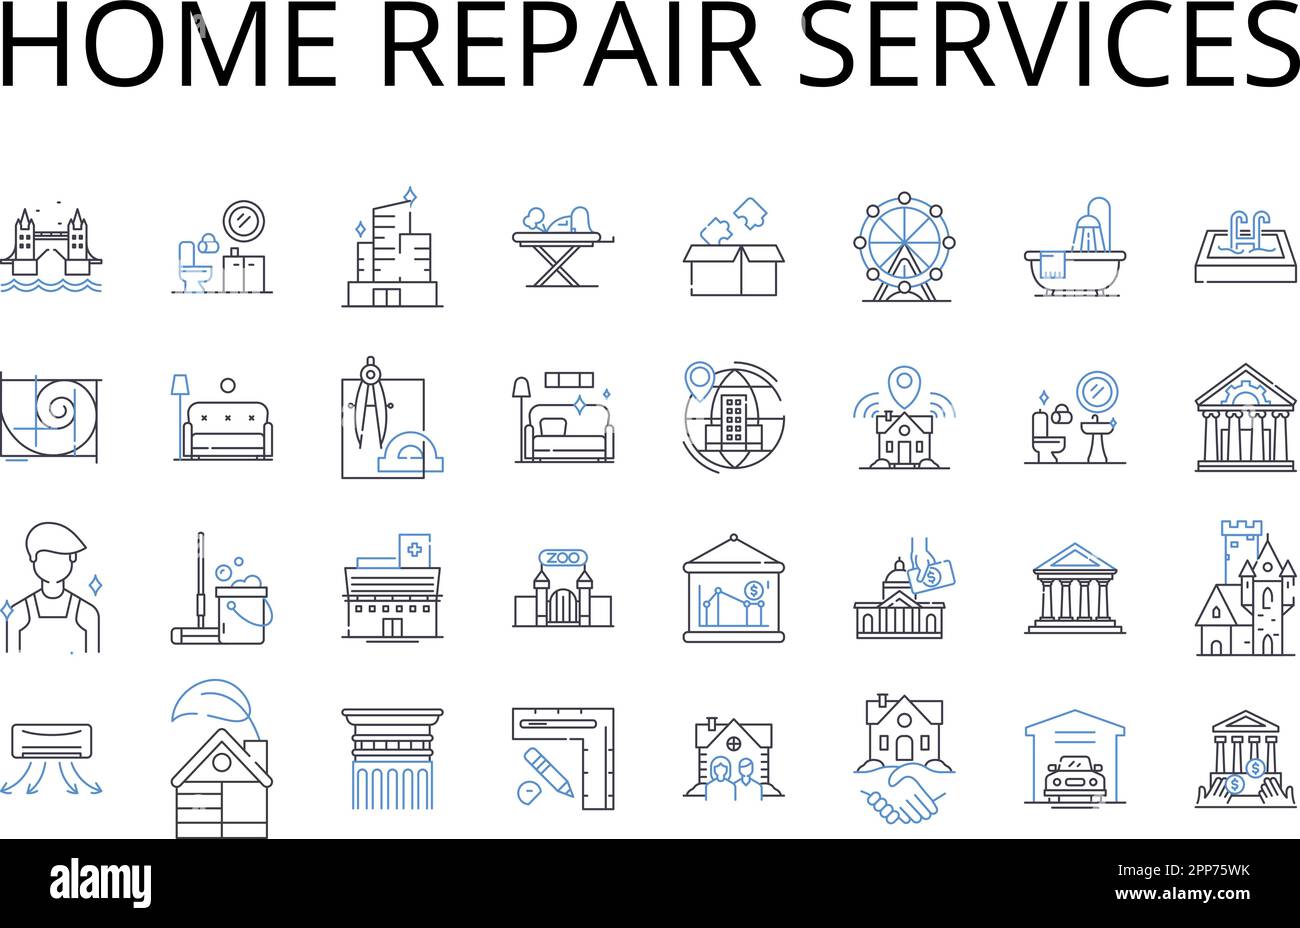 Home repair services line icons collection. Handyman services, Household maintenance, Property repair, Fixing up, Property restoration, Renovation Stock Vector